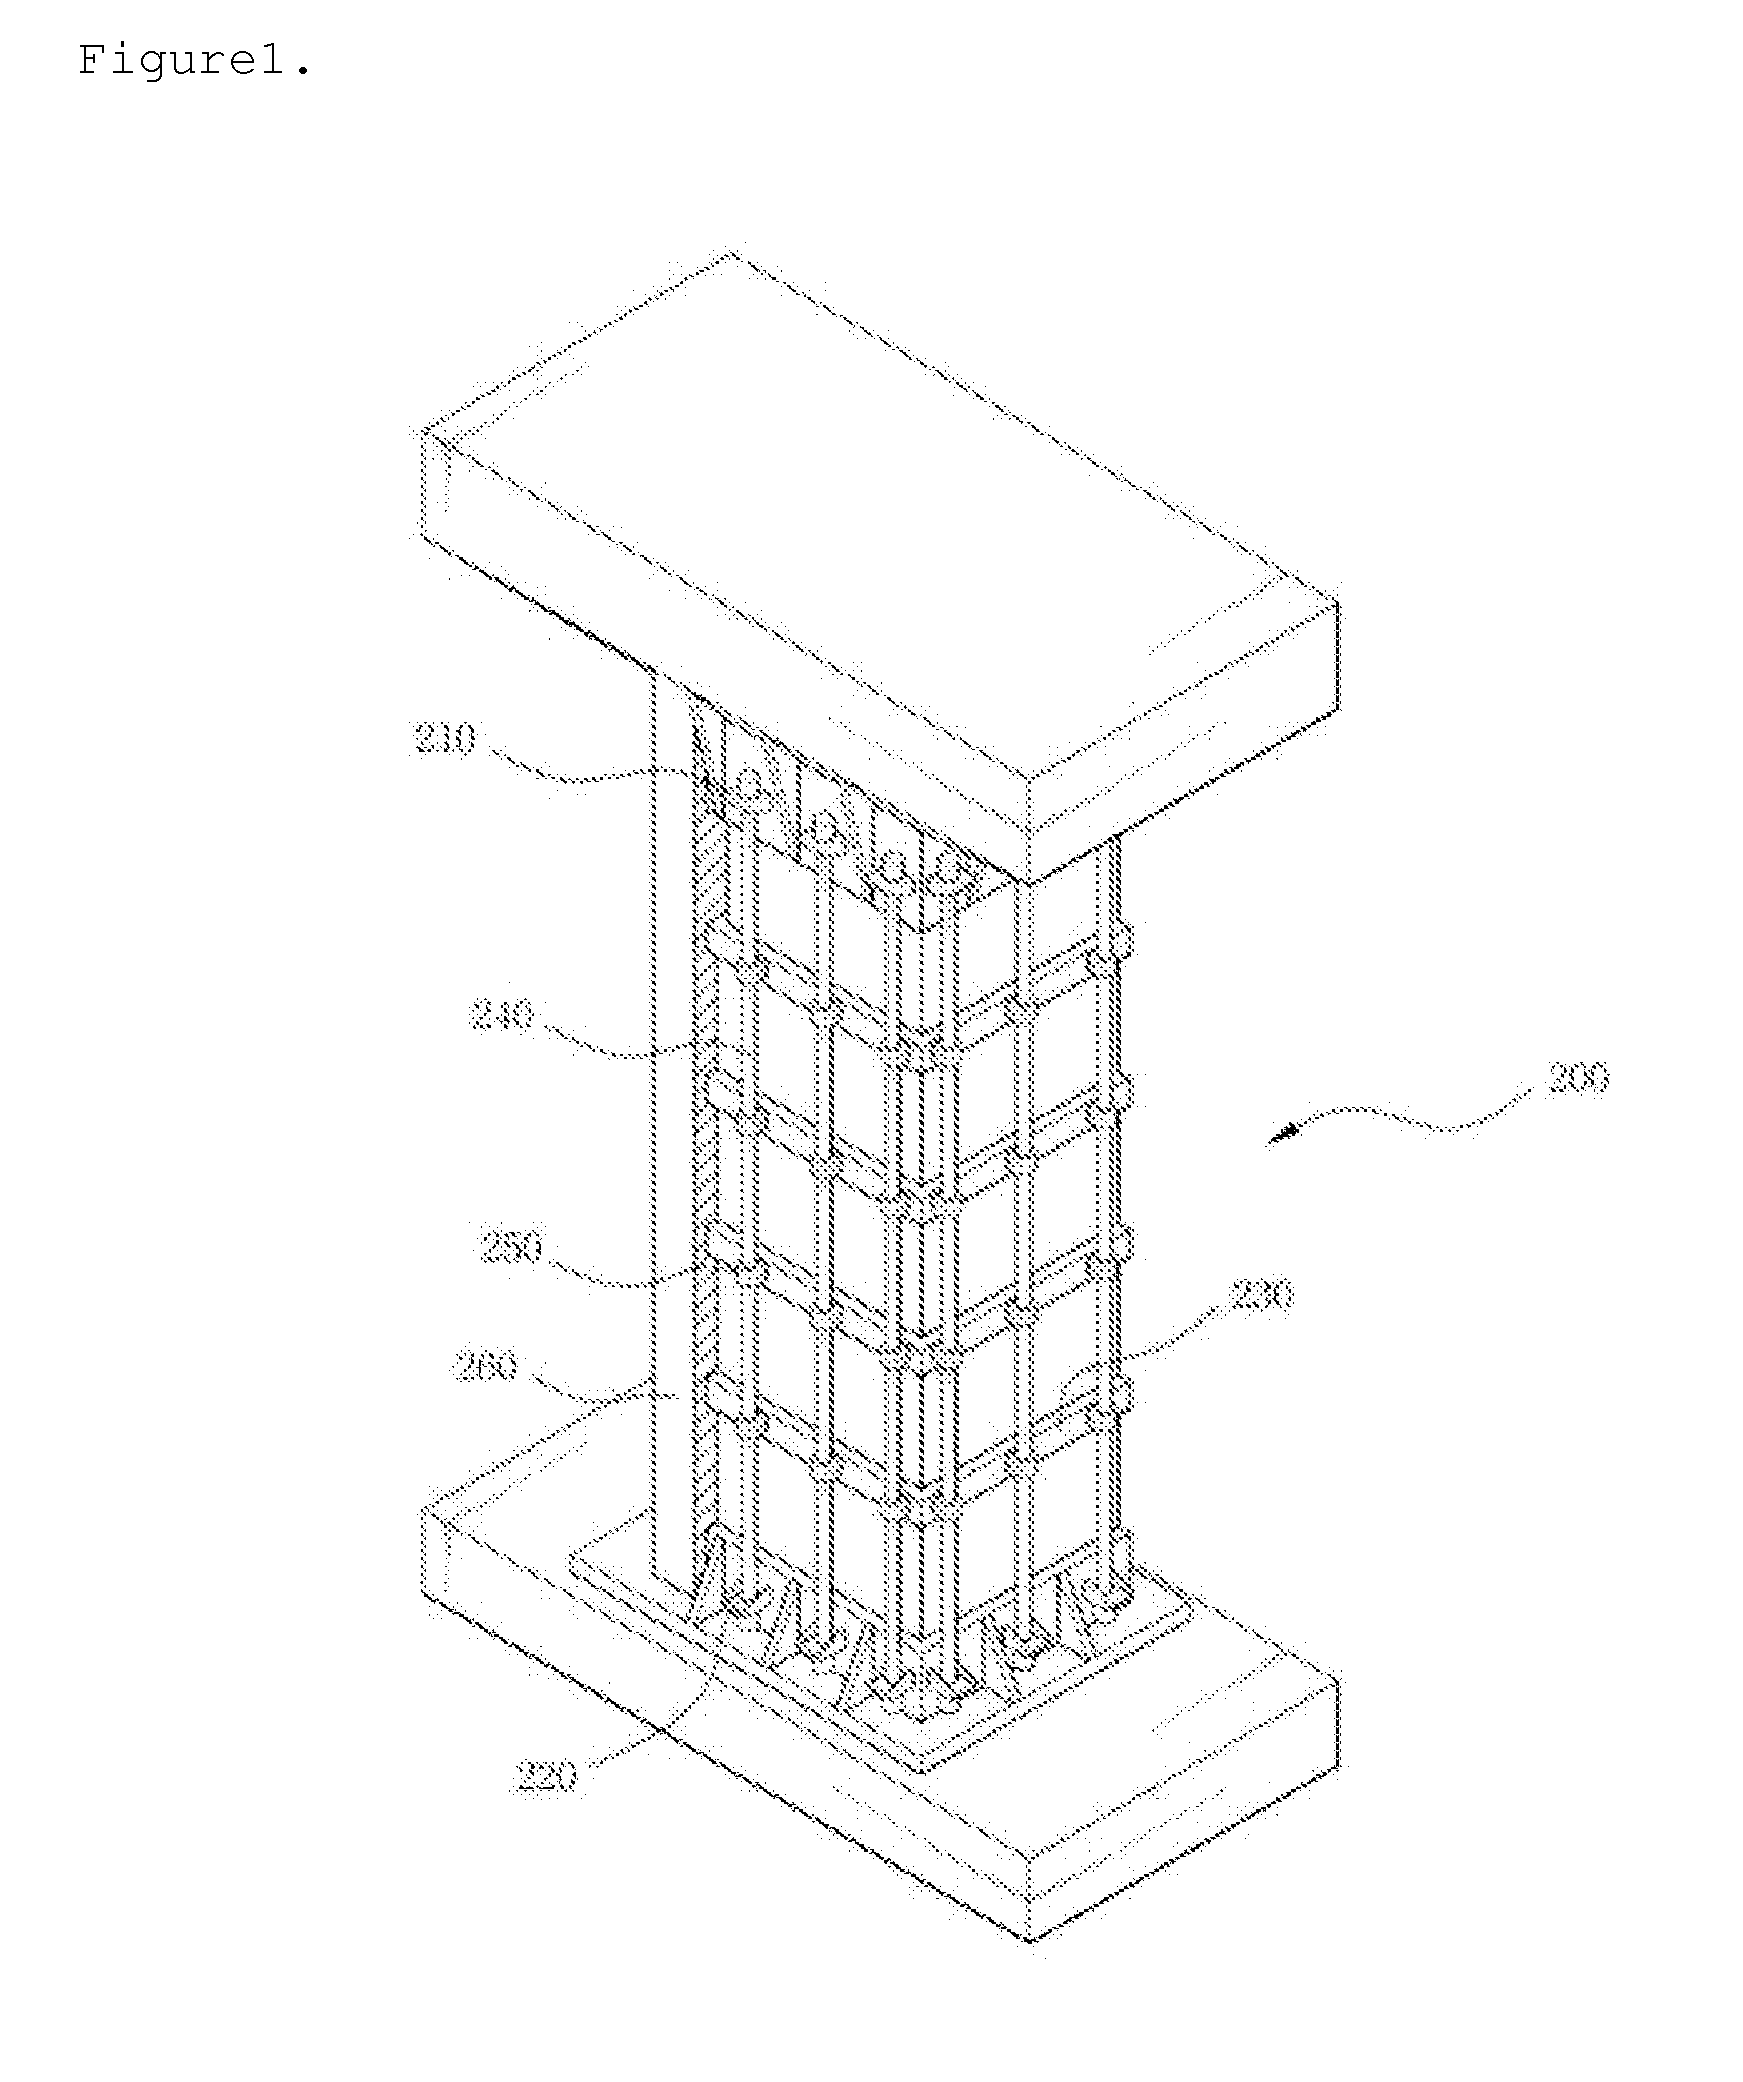 Structure for strengthening of building column structures